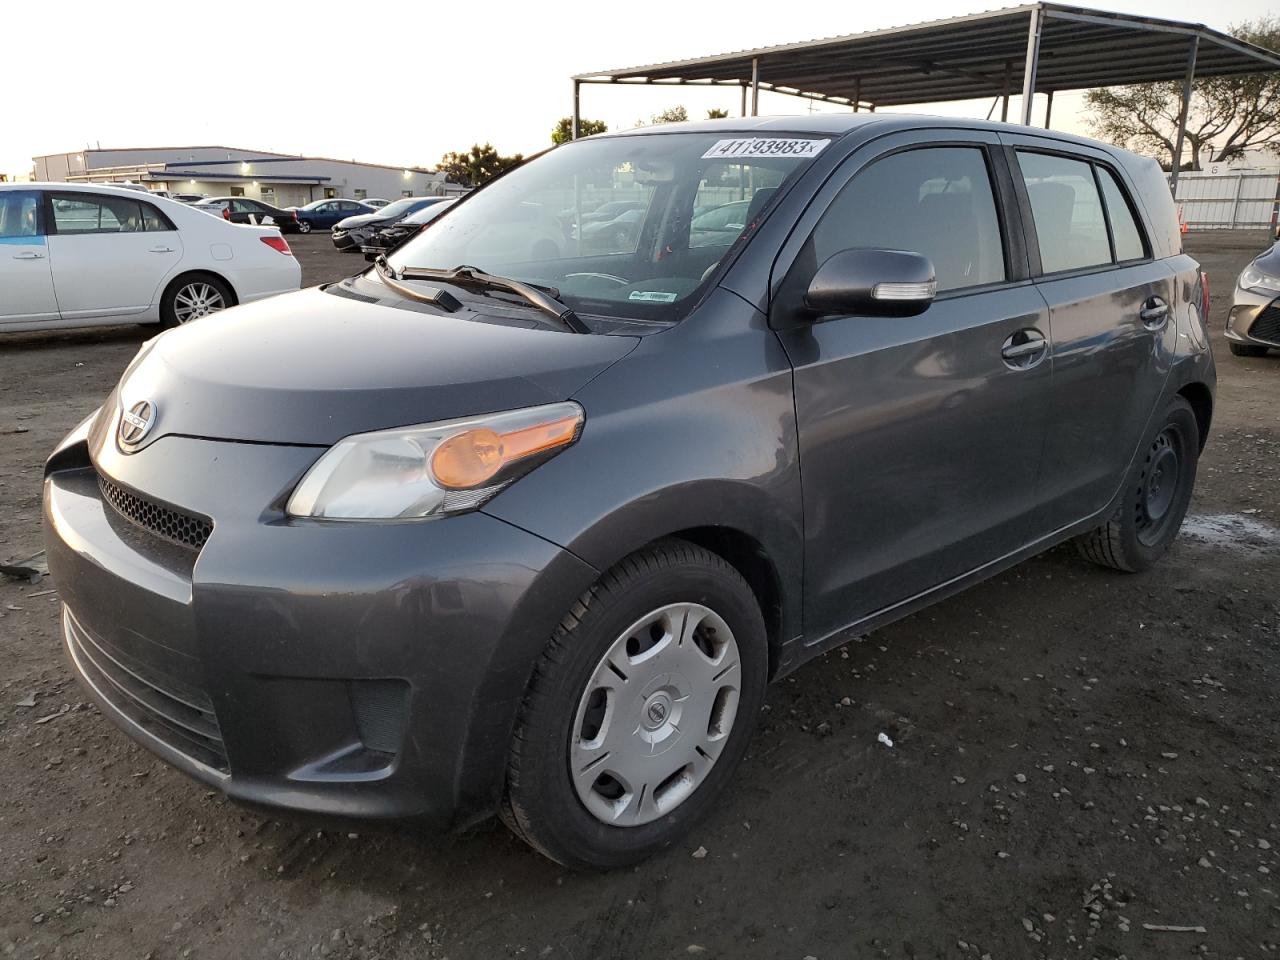 2014 Scion XD for sale at Copart San Diego, CA Lot #41193*** |  SalvageReseller.com